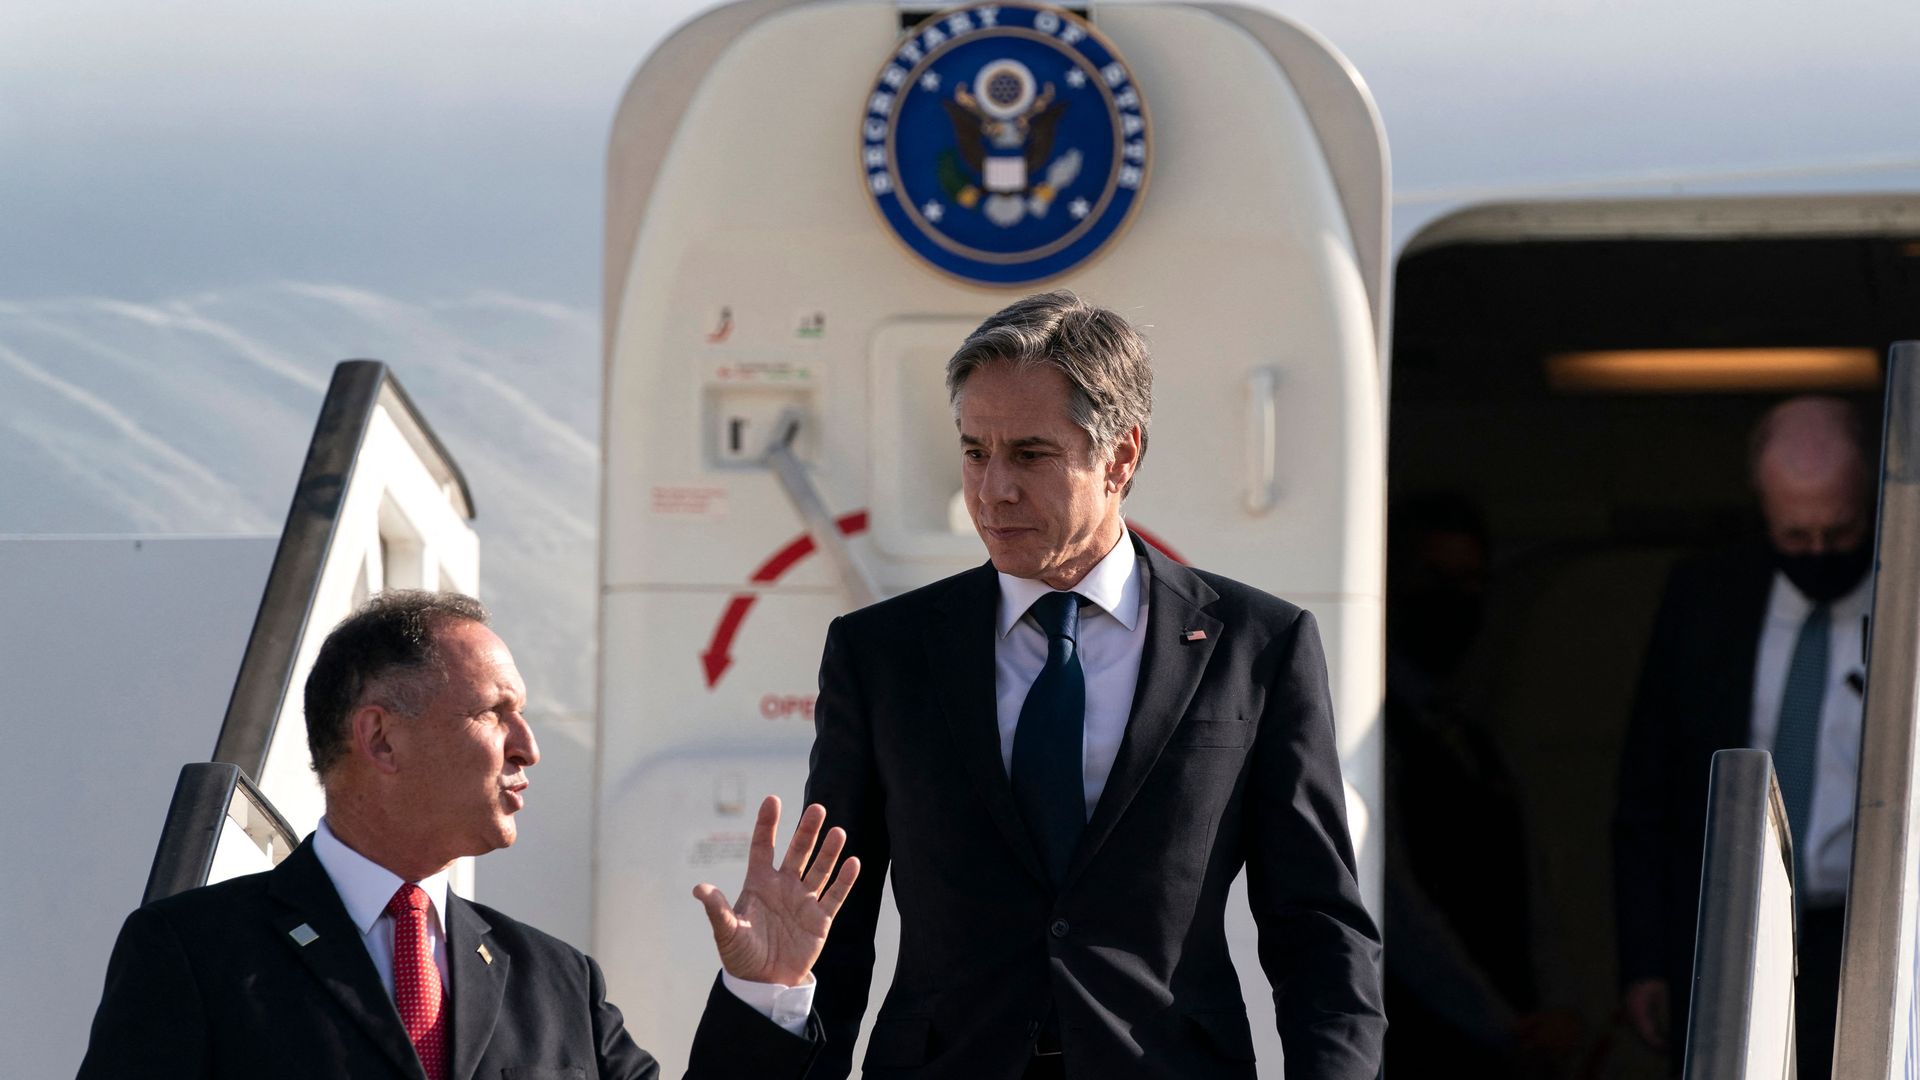 Secretary of State Antony Blinken (C) is greeted by Israeli Chief of State Protocol Gil Haskelas, as he steps off the plane upon arrival at Tel Aviv Ben Gurion Airport, May 25